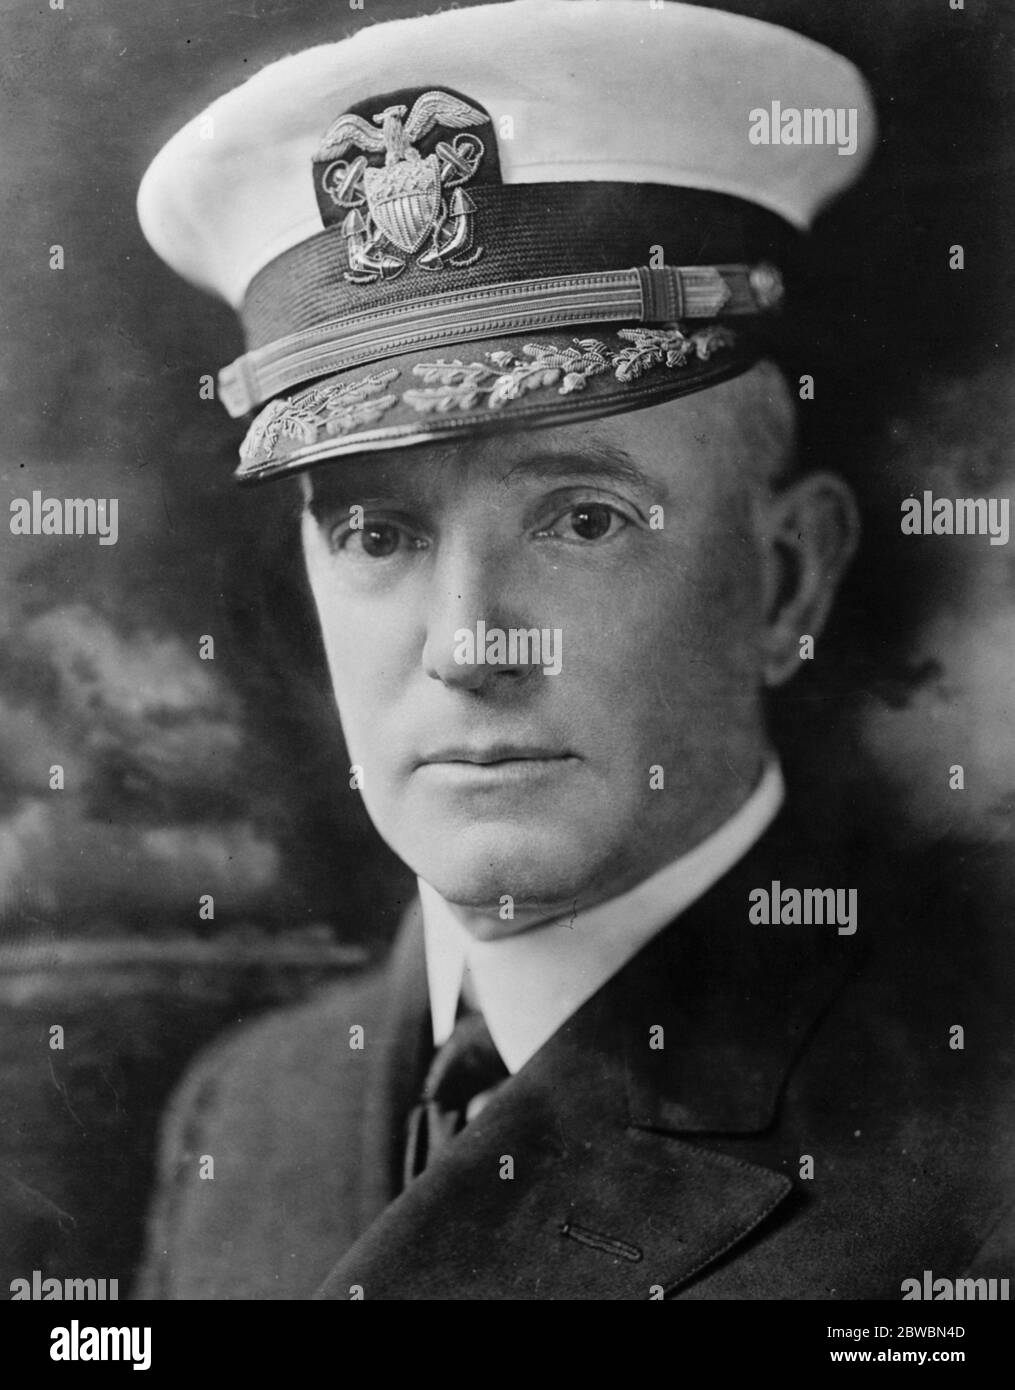 American Admiral to fly over North Pole It is reported that in August Admiral Moffett of the American Navy is to attempt to fly from Seattle to Norway across the North Pole in the huge airship Z R ! now being built at Lakehurst 23 June 1923 Stock Photo